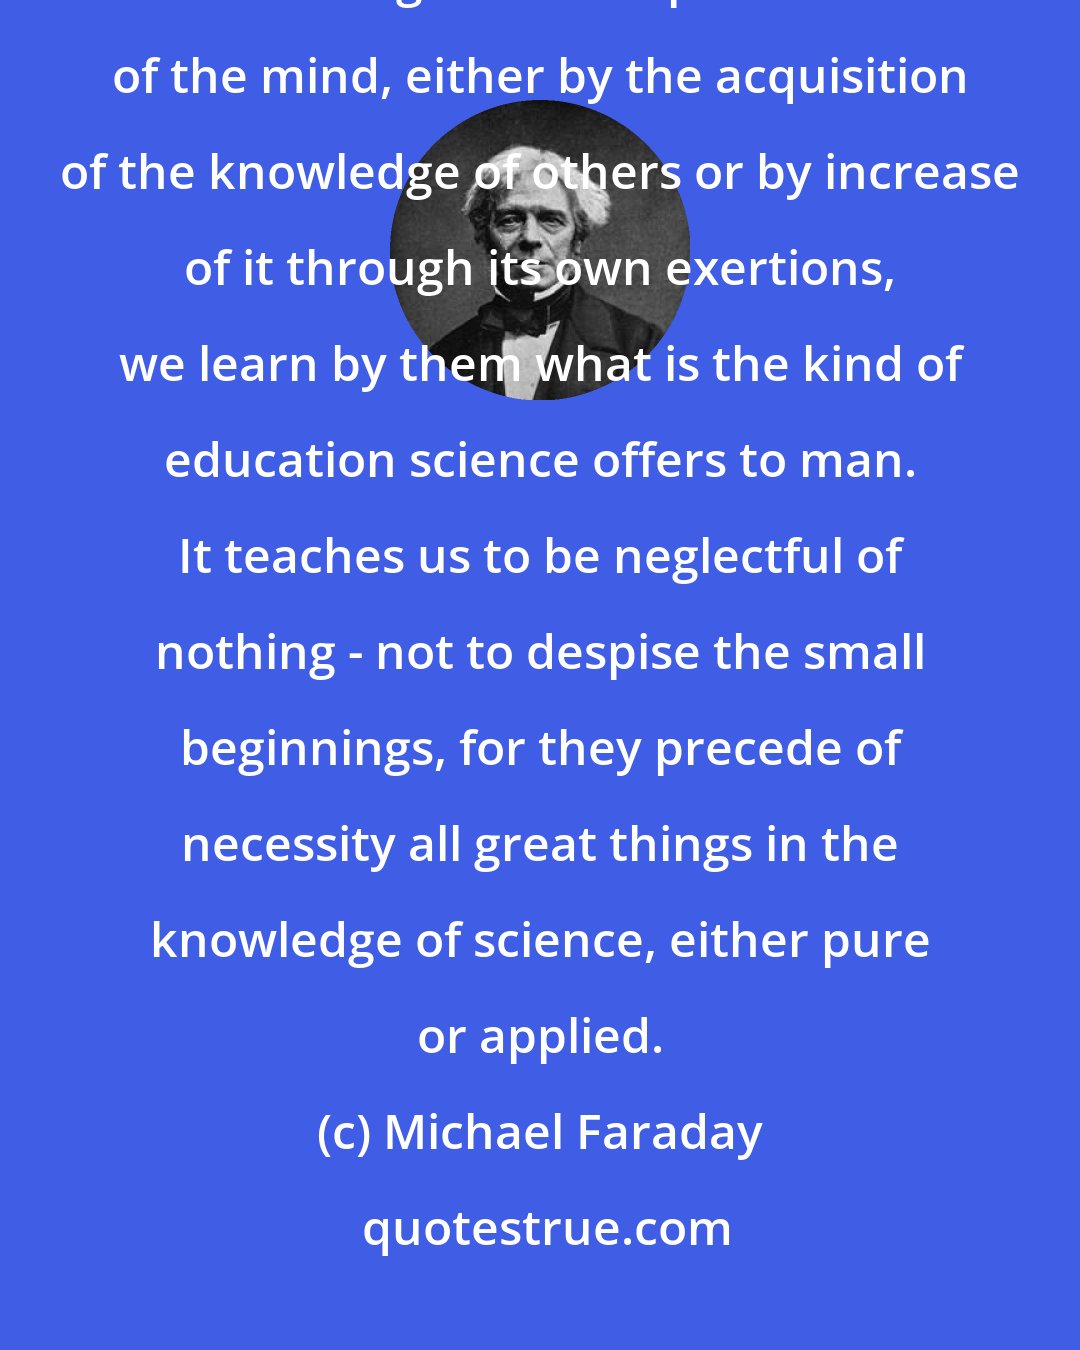 Michael Faraday: If the term education may be understood in so large a sense as to include all that belongs to the improvement of the mind, either by the acquisition of the knowledge of others or by increase of it through its own exertions, we learn by them what is the kind of education science offers to man. It teaches us to be neglectful of nothing - not to despise the small beginnings, for they precede of necessity all great things in the knowledge of science, either pure or applied.